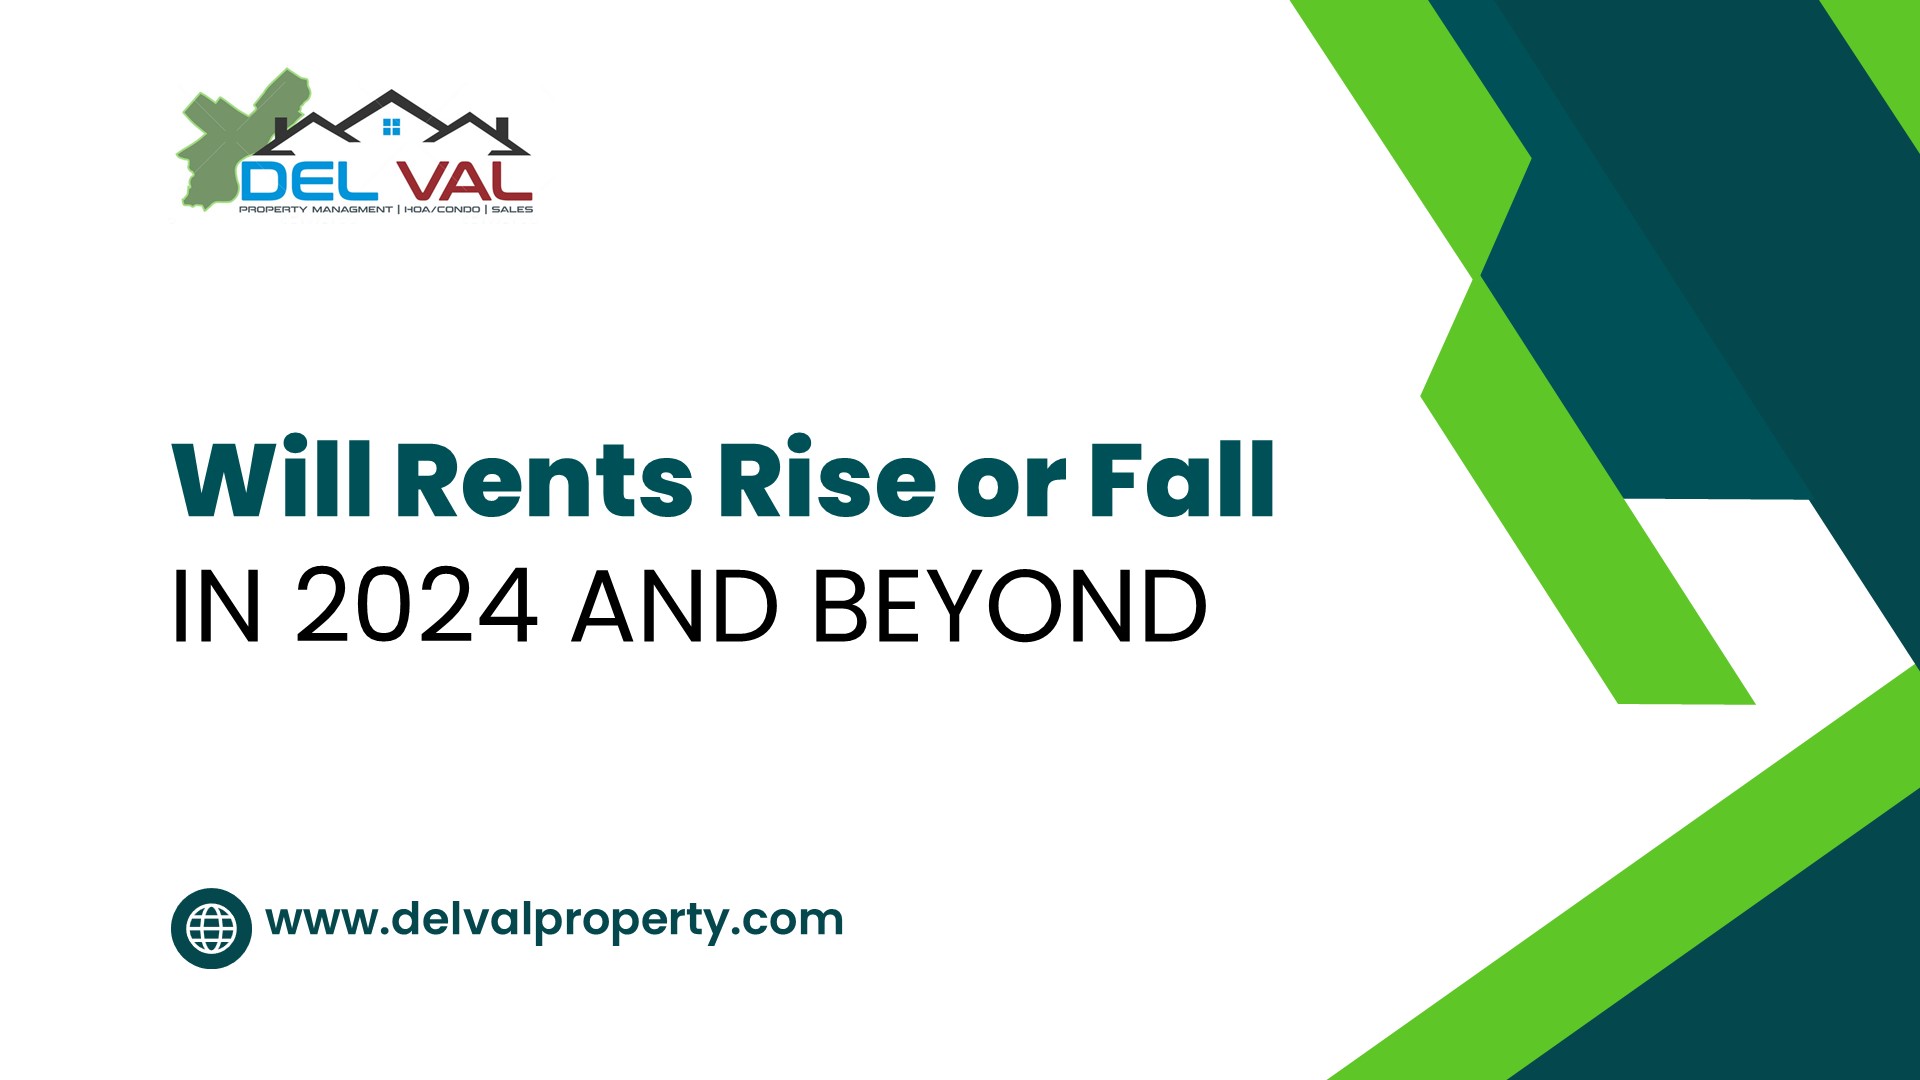 Will Rents Rise or Fall In 2024 and Beyond? Insights from Del Val Property Management